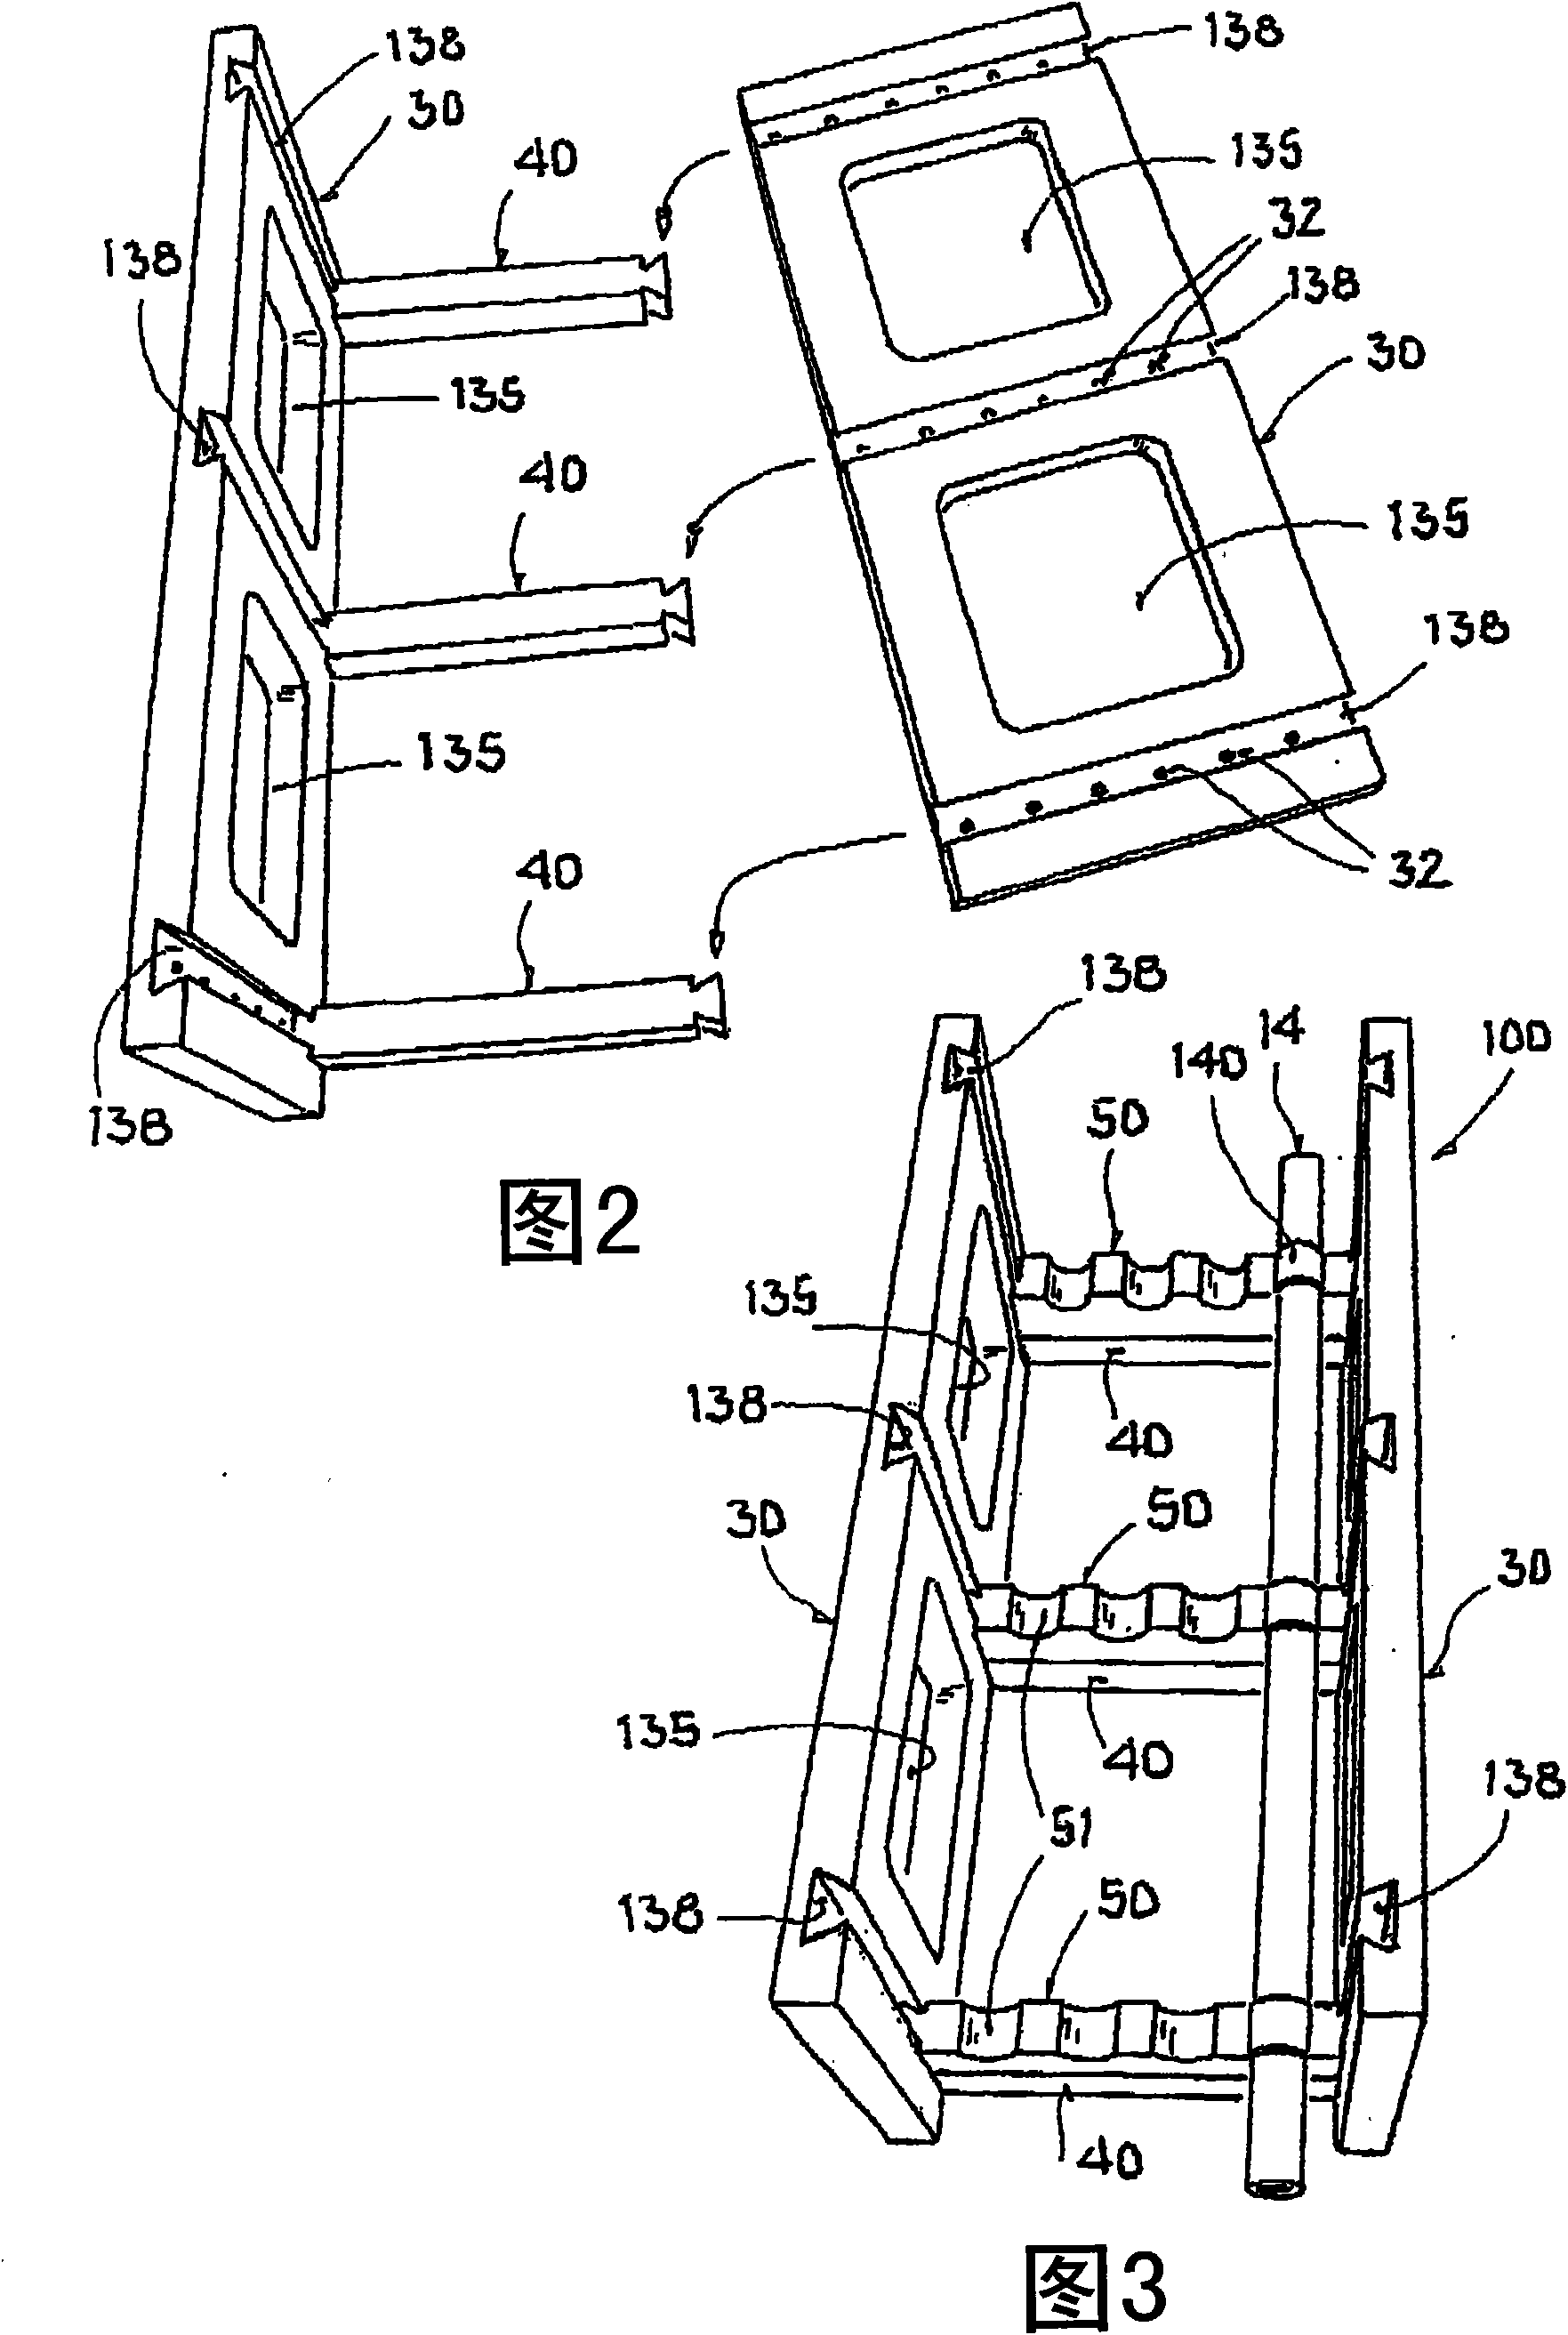 Purification apparatus for water